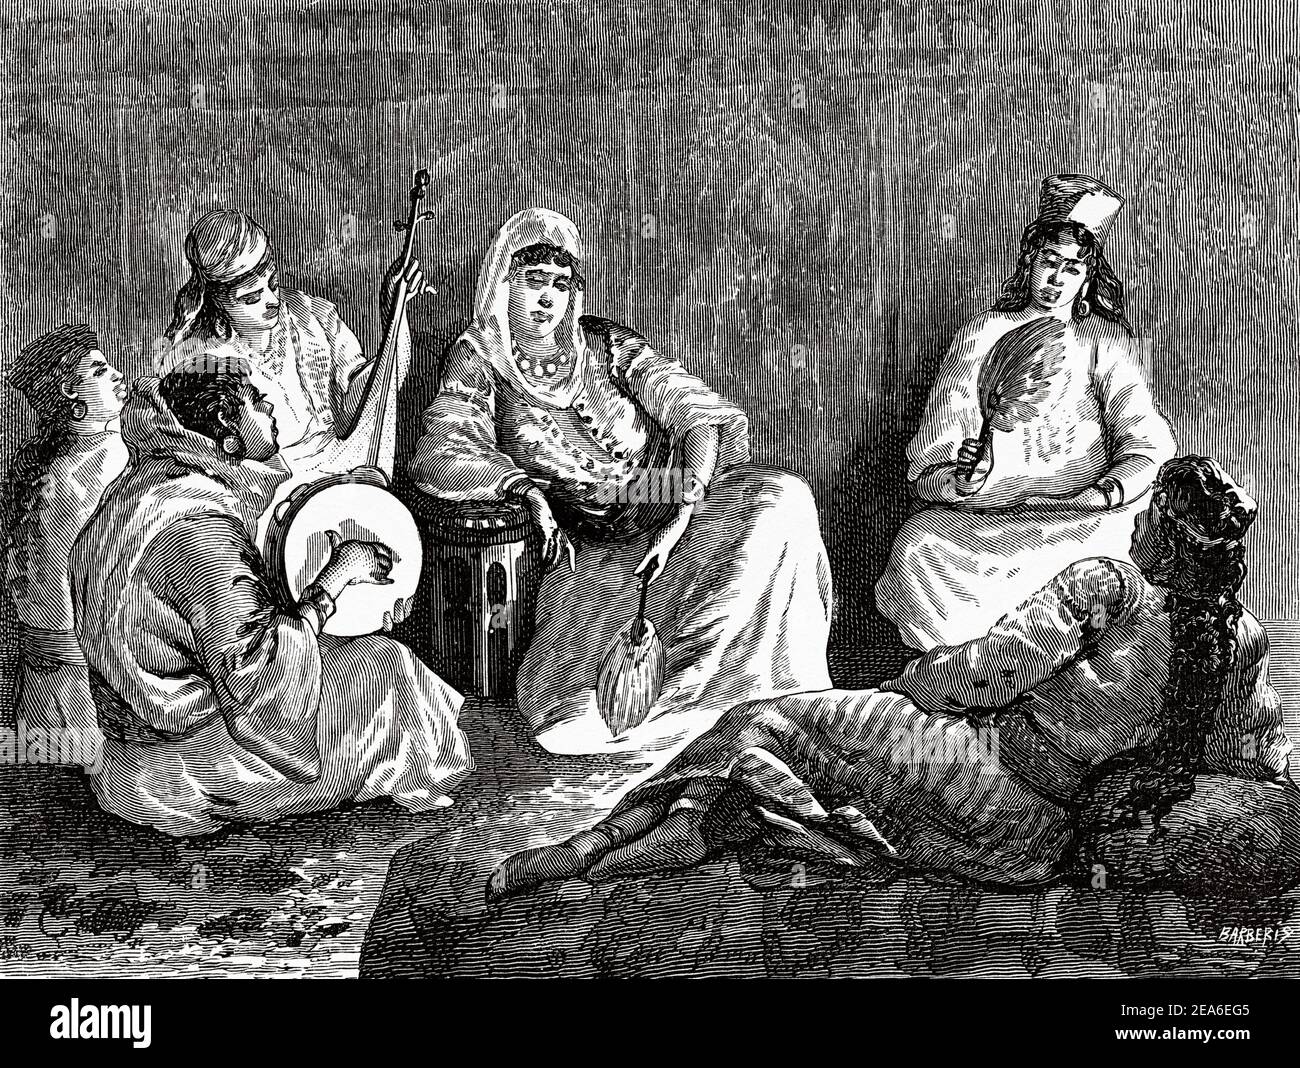 Women Of The Harem Of The Grand Vizier Of Morocco In 1879 North Africa Old 19th Century